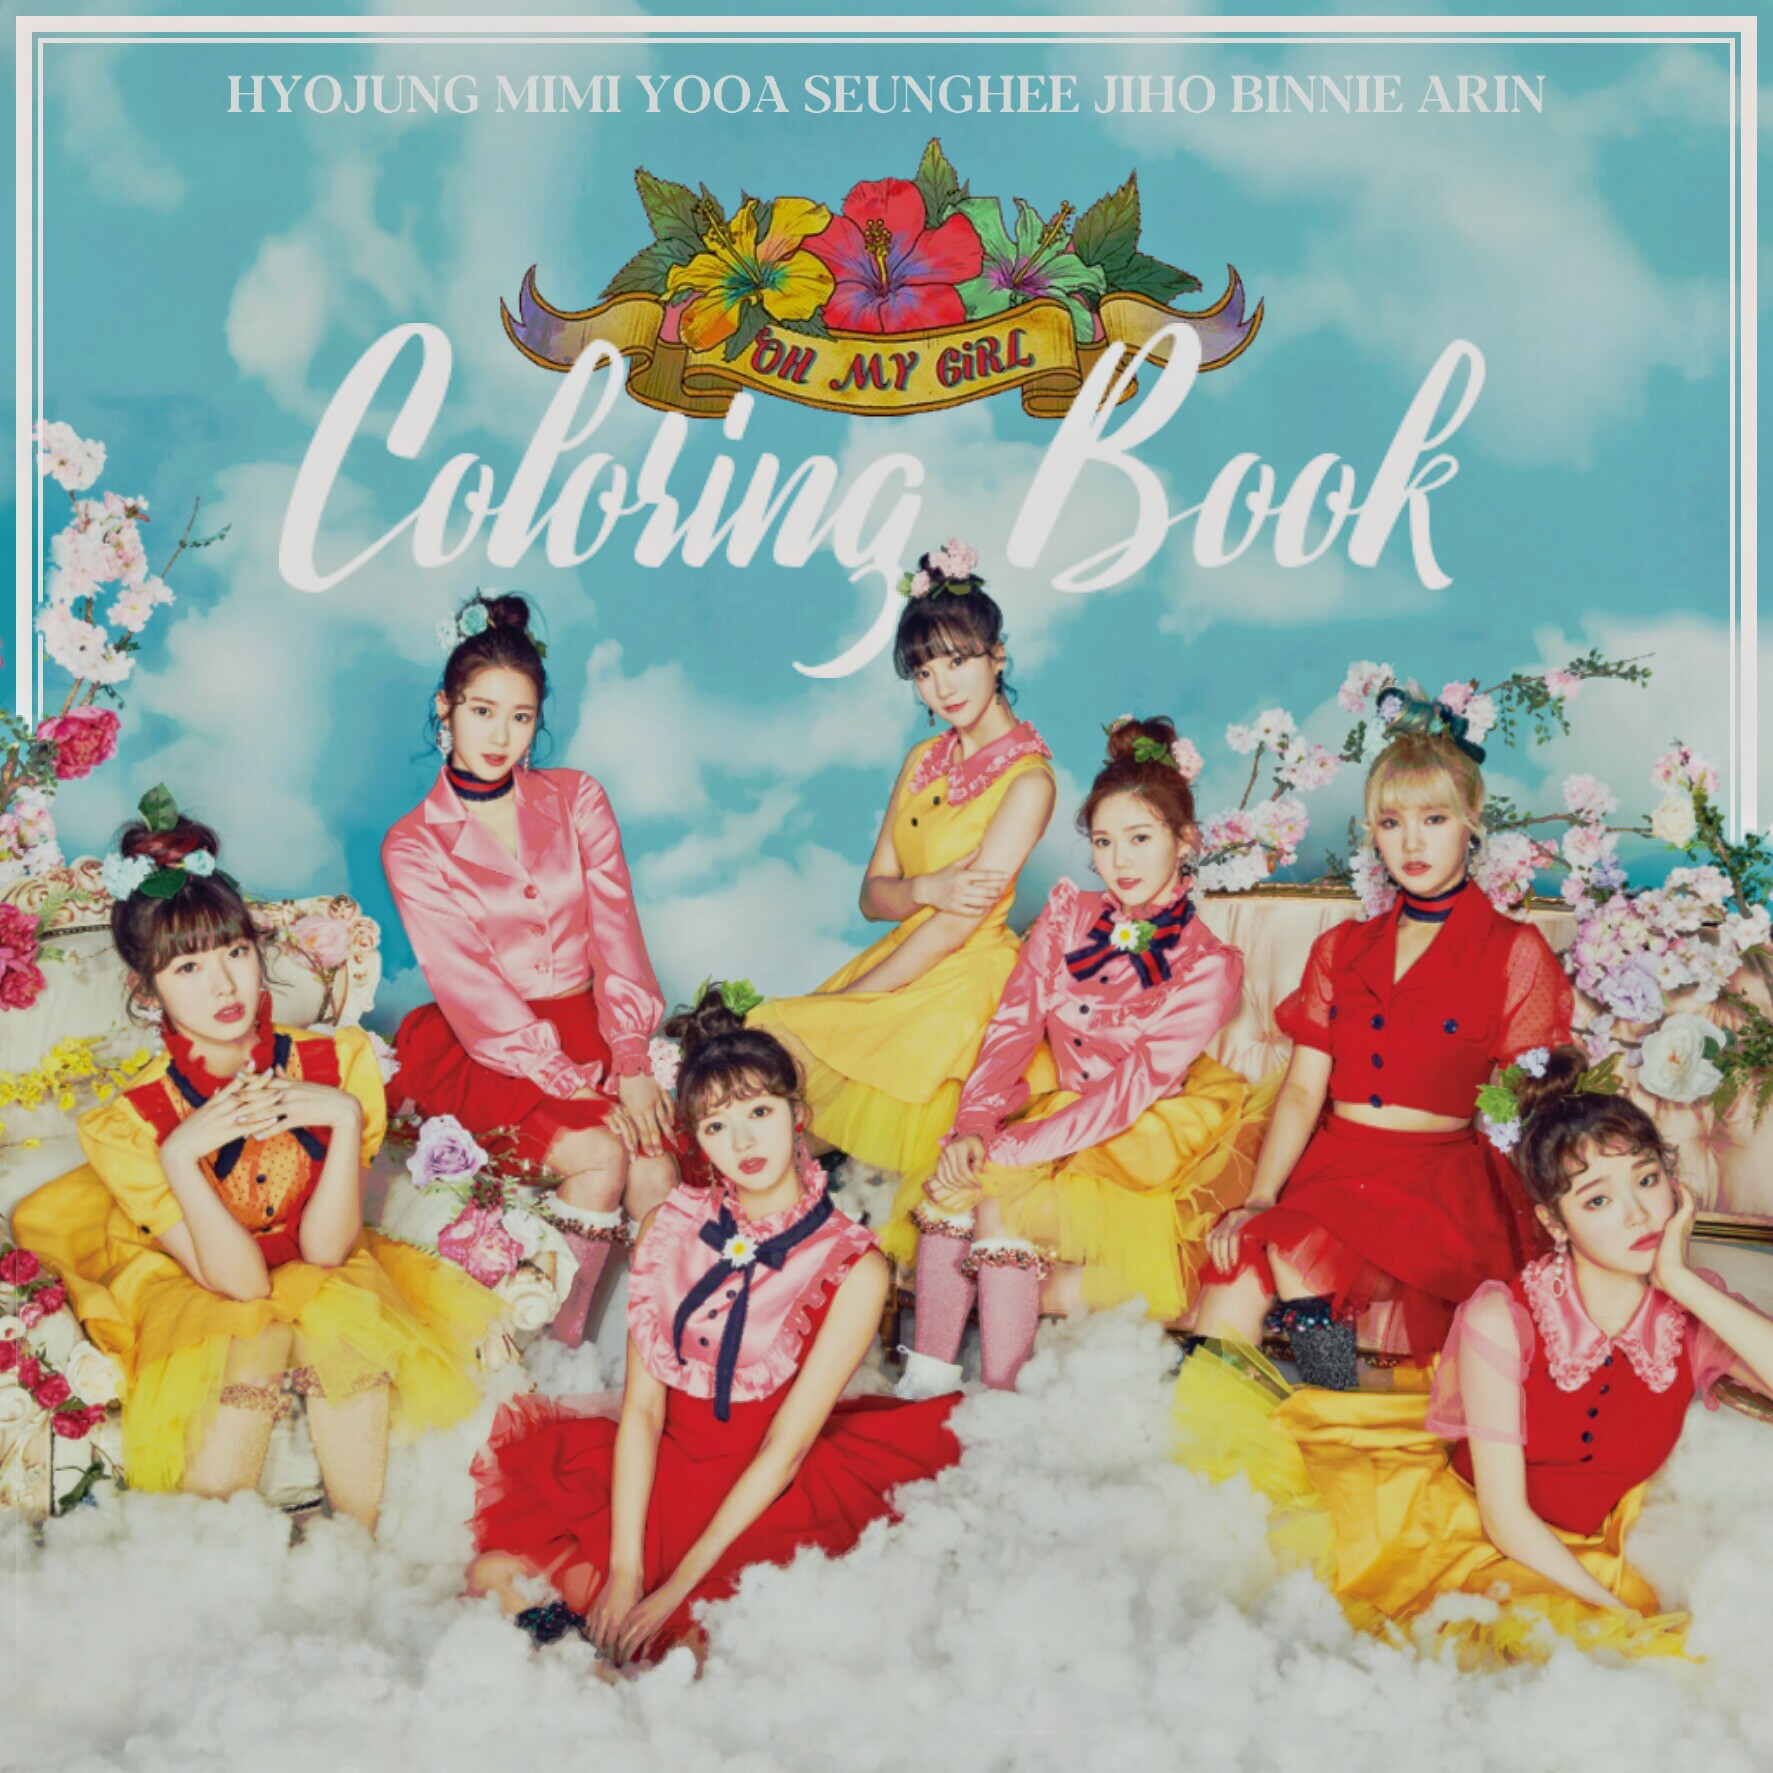 Download Oh My Girl Coloring Book Album Cover By Lealbum On Deviantart